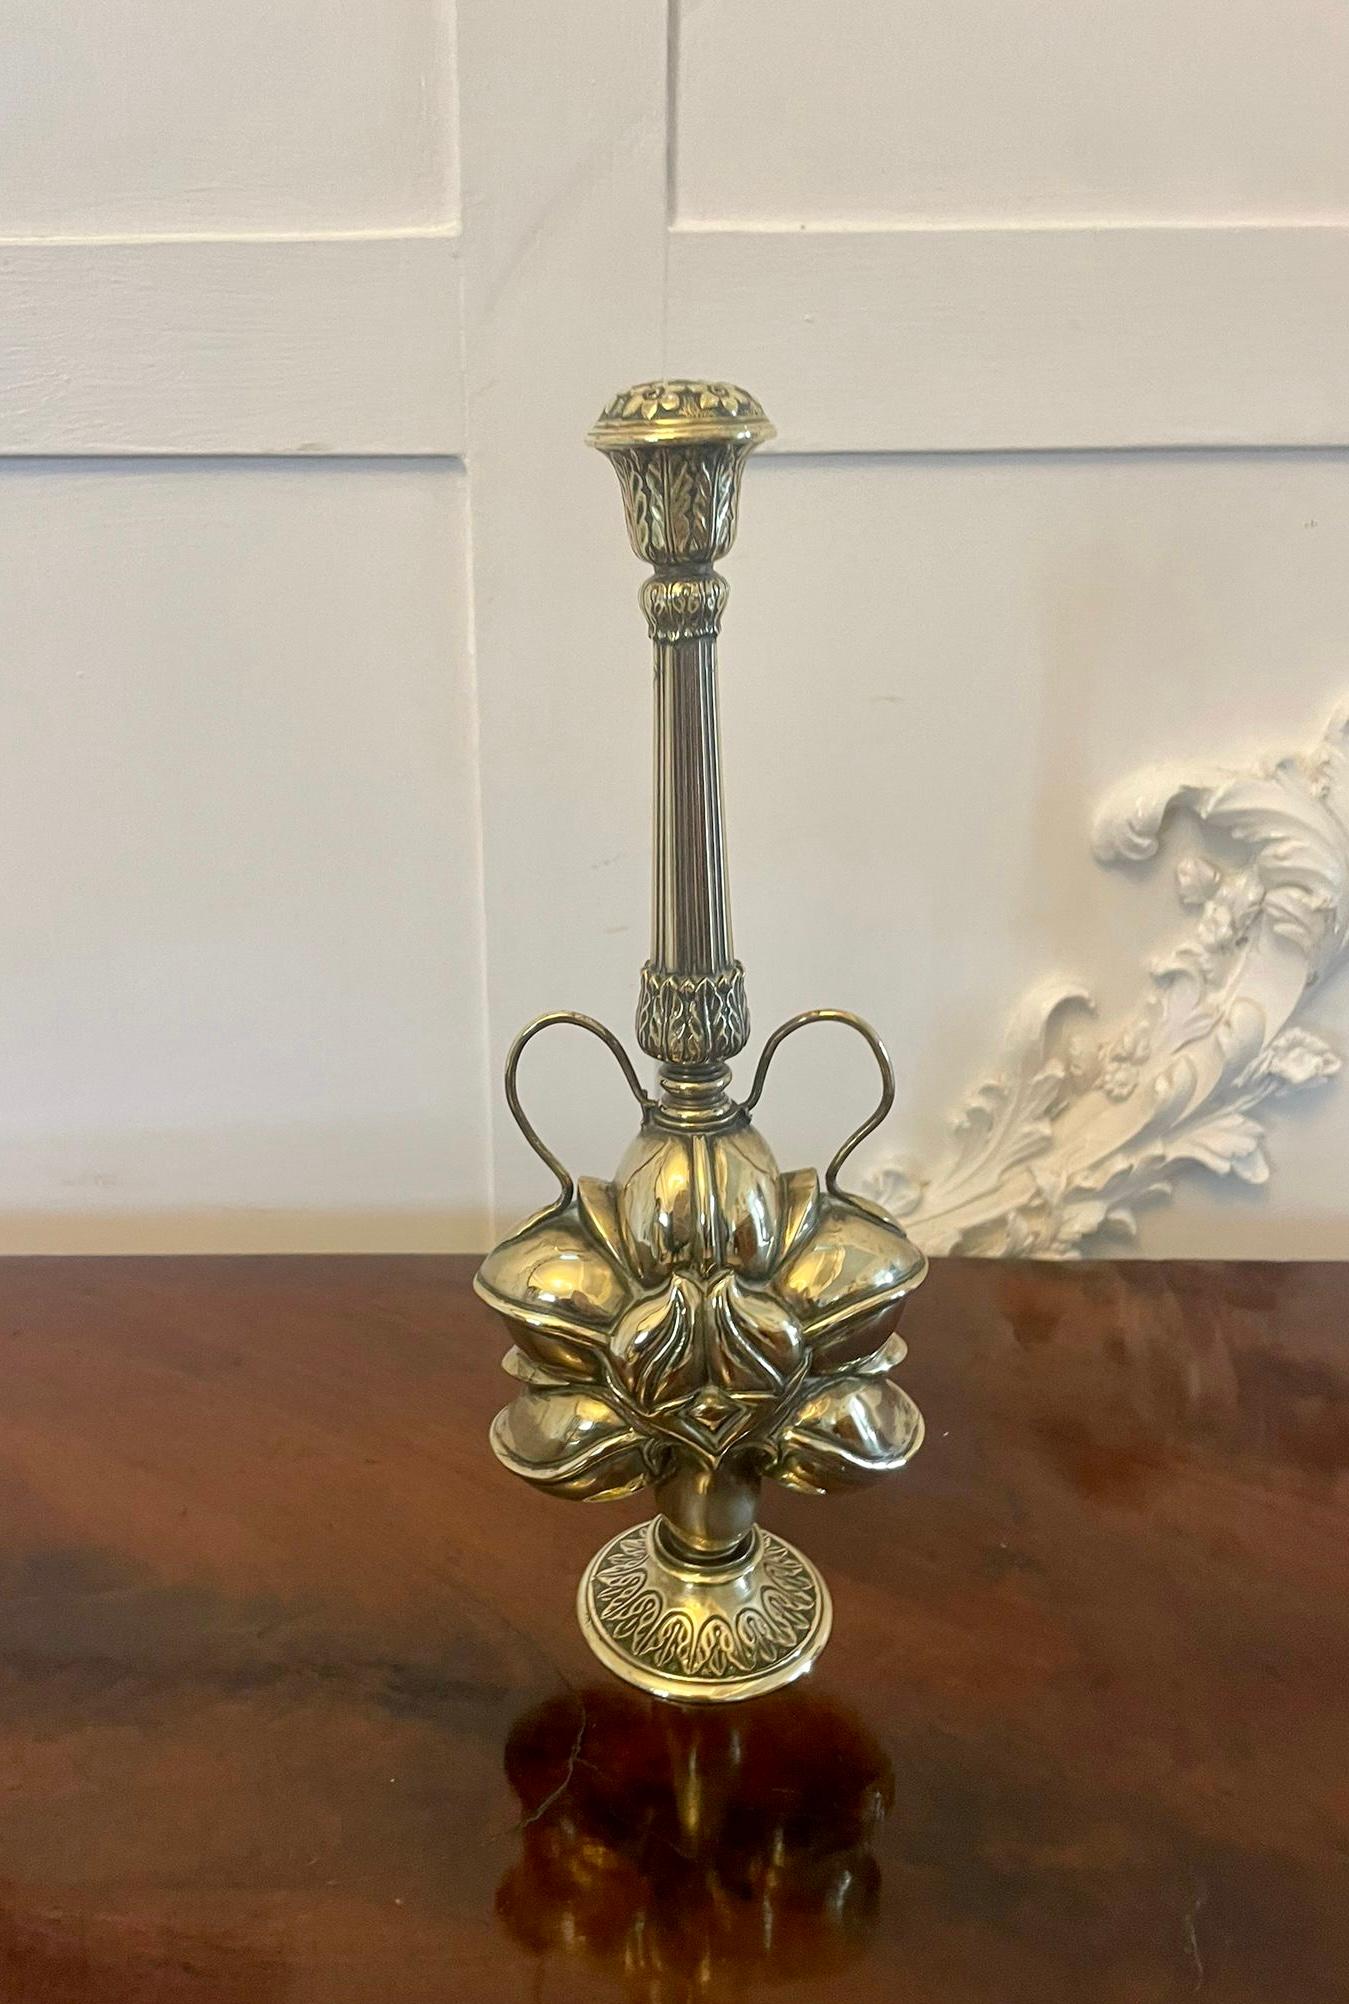 Unusual Antique Victorian quality brass shaker having an ornate reeded brass stem above a shaped centre standing on a circular base


Dimensions:
Height 26.5 cm (10.43 in)
Width 10 cm (3.93 in)
Depth 6 cm (2.36 in)


Dated 1860
